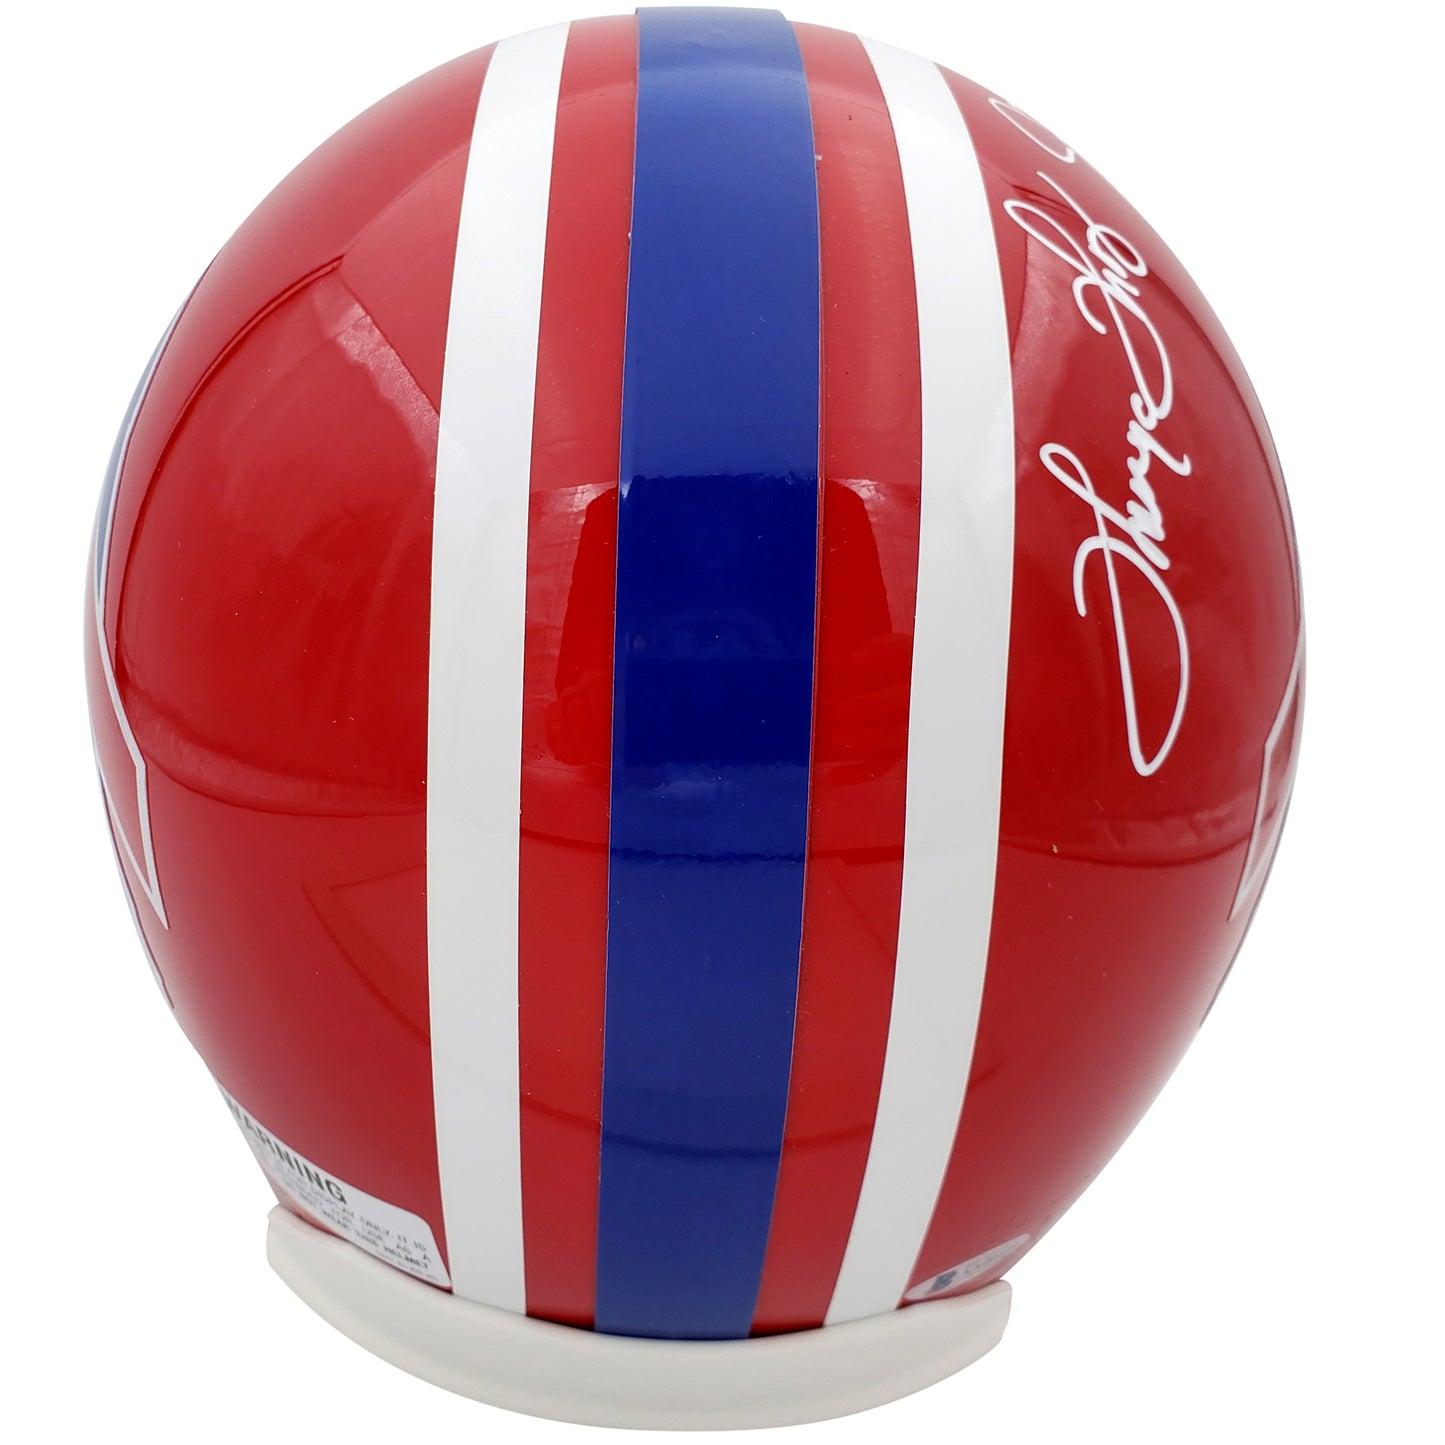 Buffalo Bills Greats Jim Kelly , Andre Reed And Thurman Thomas Autographed Deluxe Full-Size Replica Helmet - Beckett